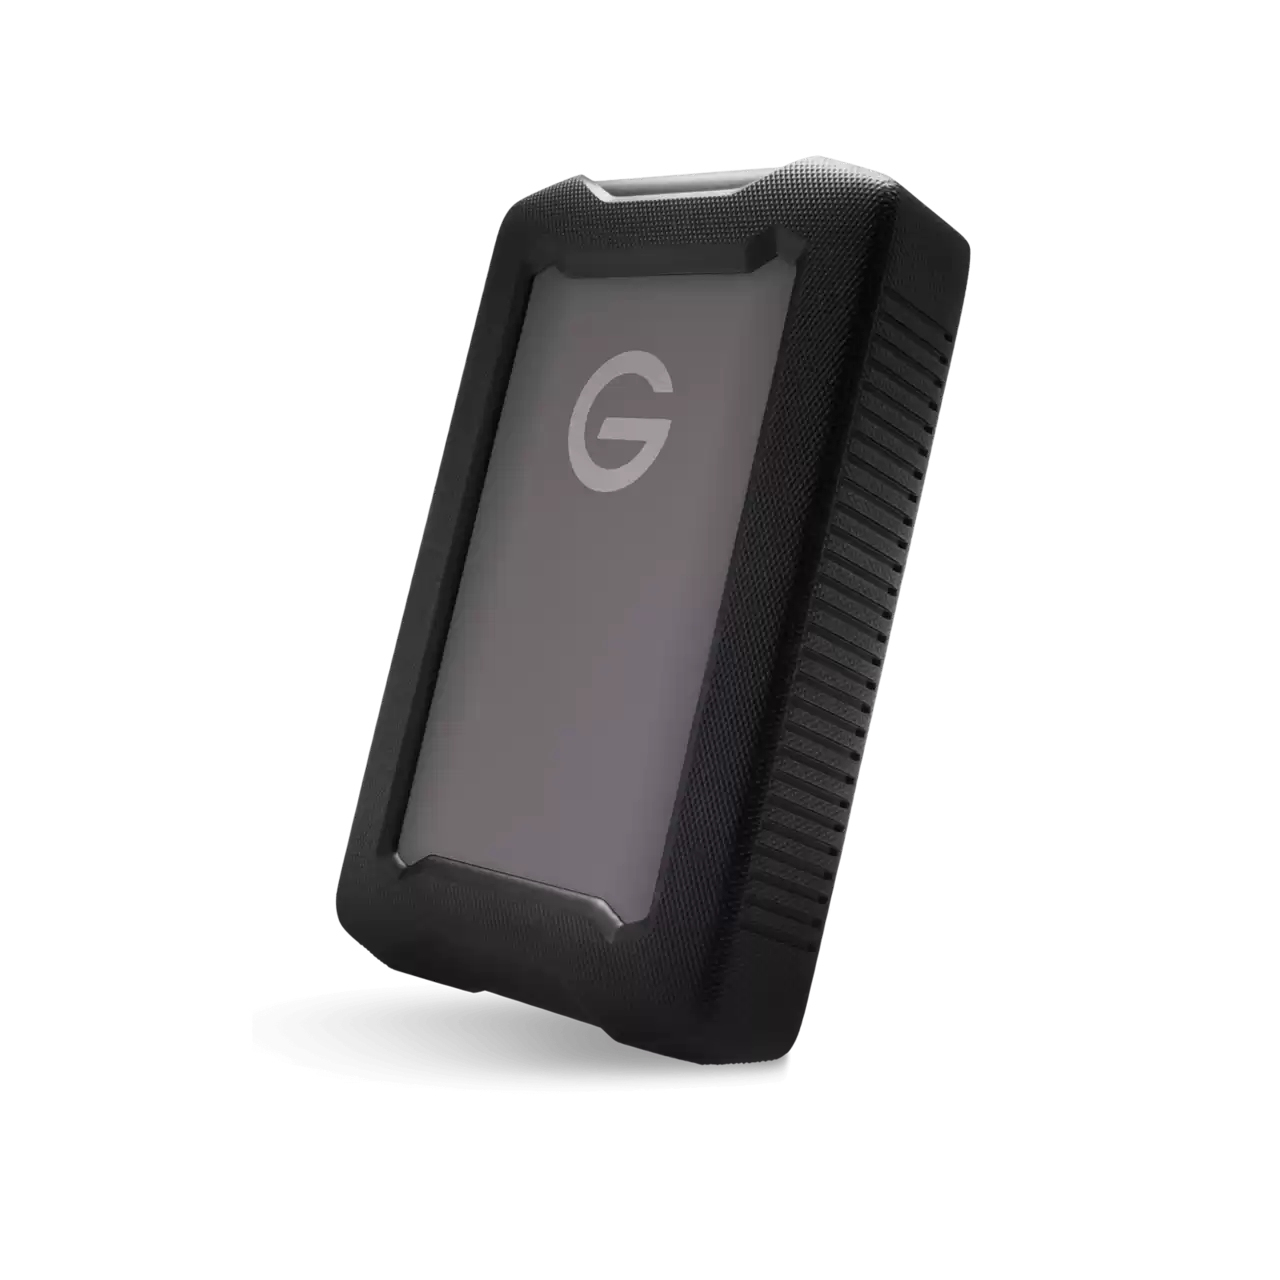  Professional G-DRIVE ArmorATD 4TB 2.5inch 140MB/s USB-C 5Gbps USB 3.2 Gen 1 Rugged portable external HDD - Space Grey